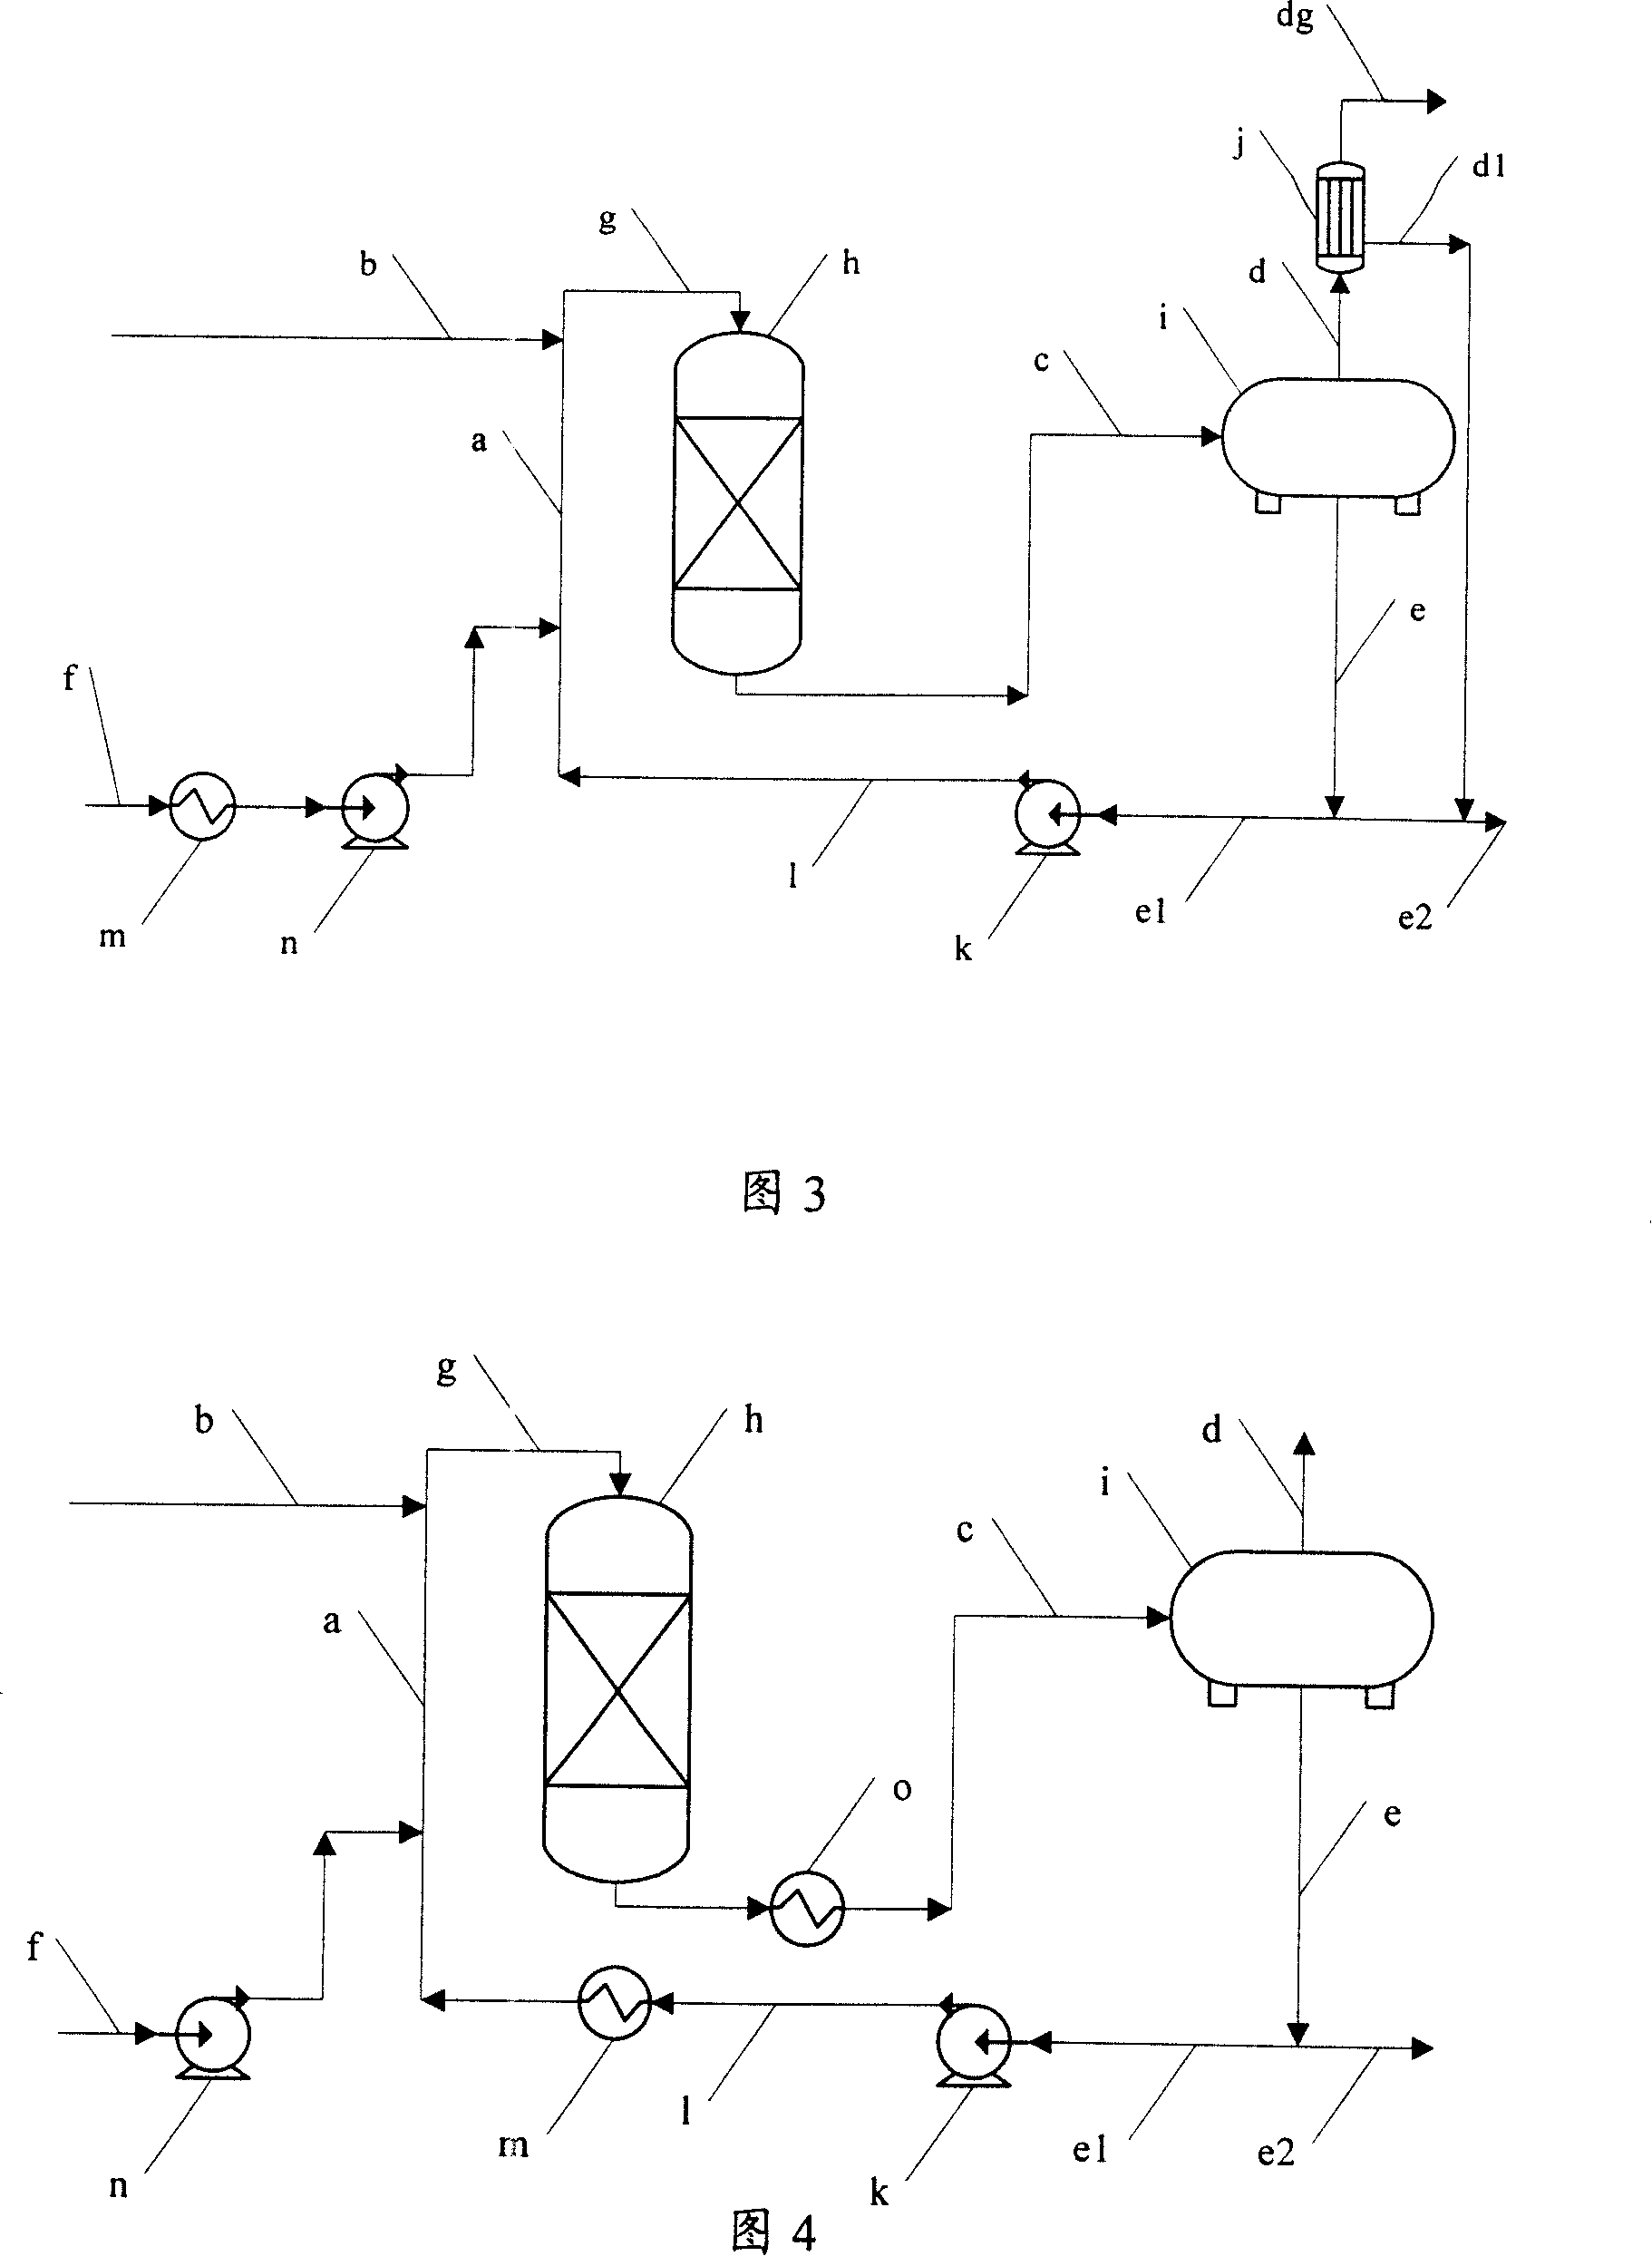 Method for liquid phase selective hydrogenation of C3 hydrocarbons